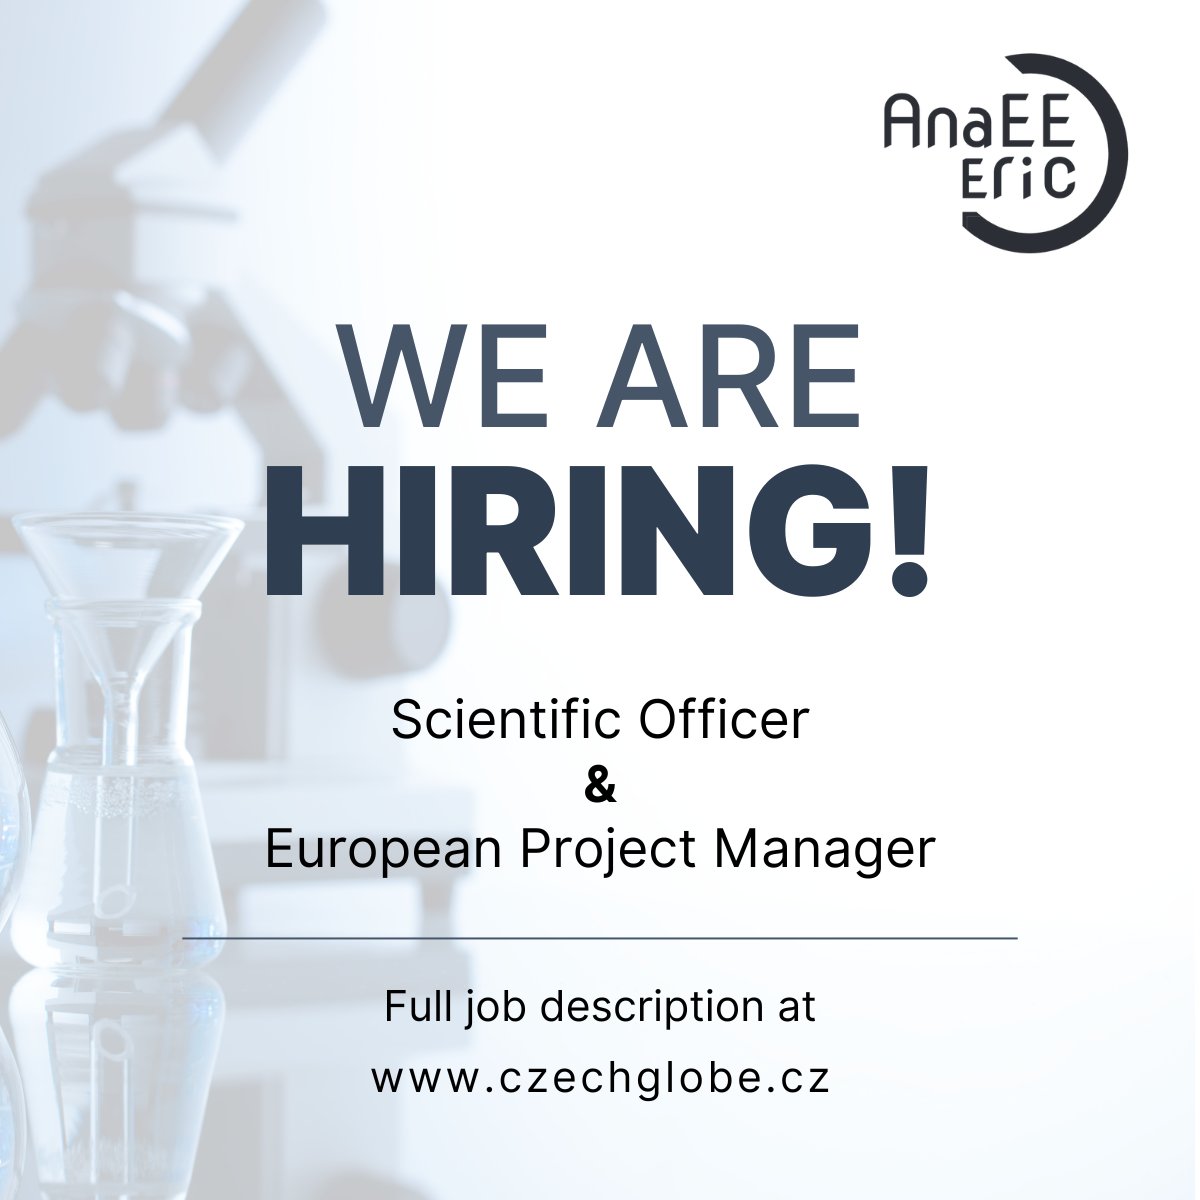 Join Us at AnaEE-ERIC in our Interface and Synthesis Centre located in CzechGlobe, Brno, Czech Republic! 🌍 Two positions: - Scientific Officer - European Project Manager For full job description and how to apply, please visit the CzechGlobe website. #CareerOpportunities